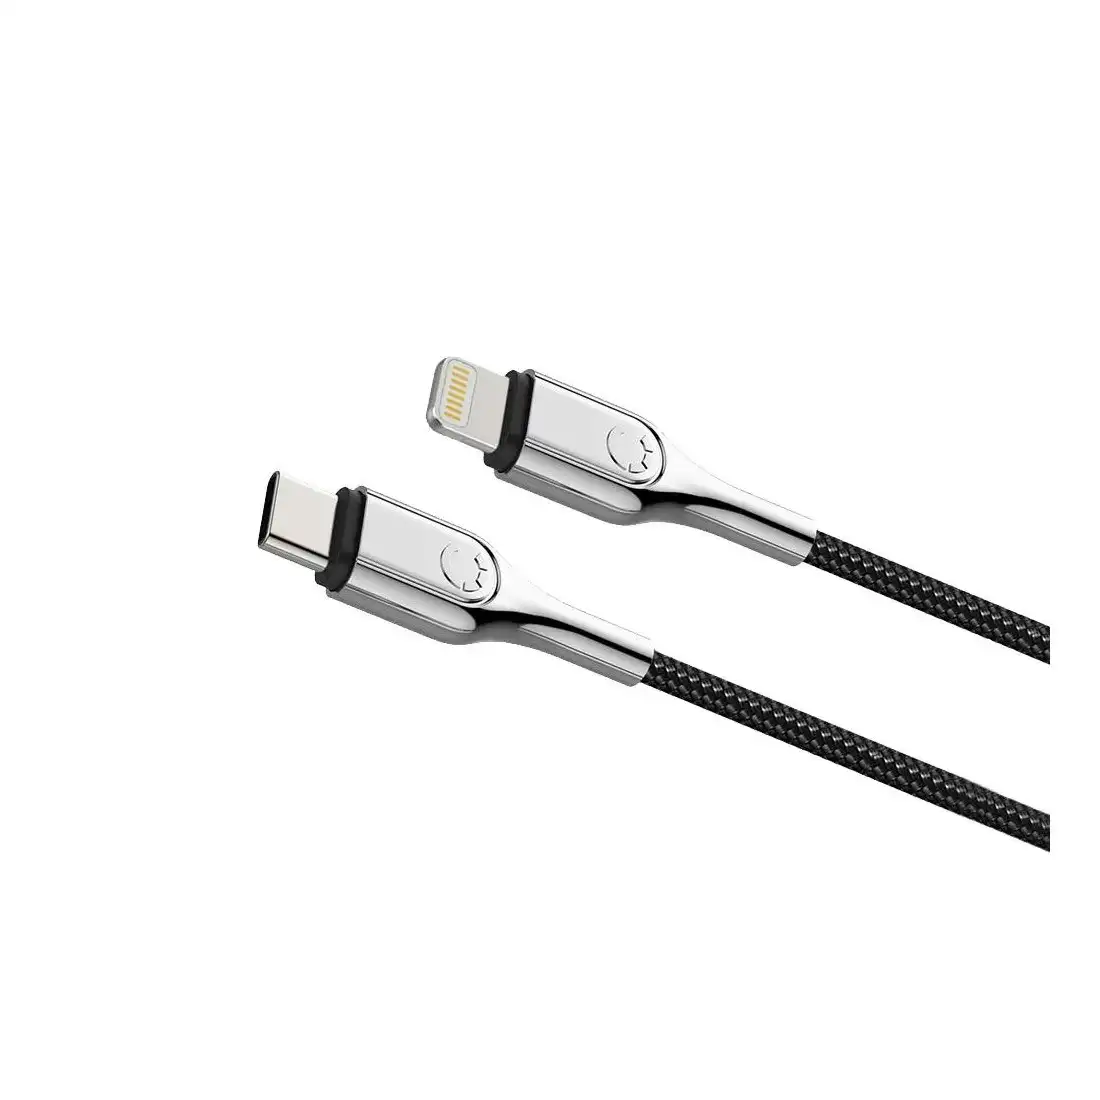 Cygnett Armoured Lightning to USB-C 2M Cable CY2801PCCCL (MFi-Certified) - Black